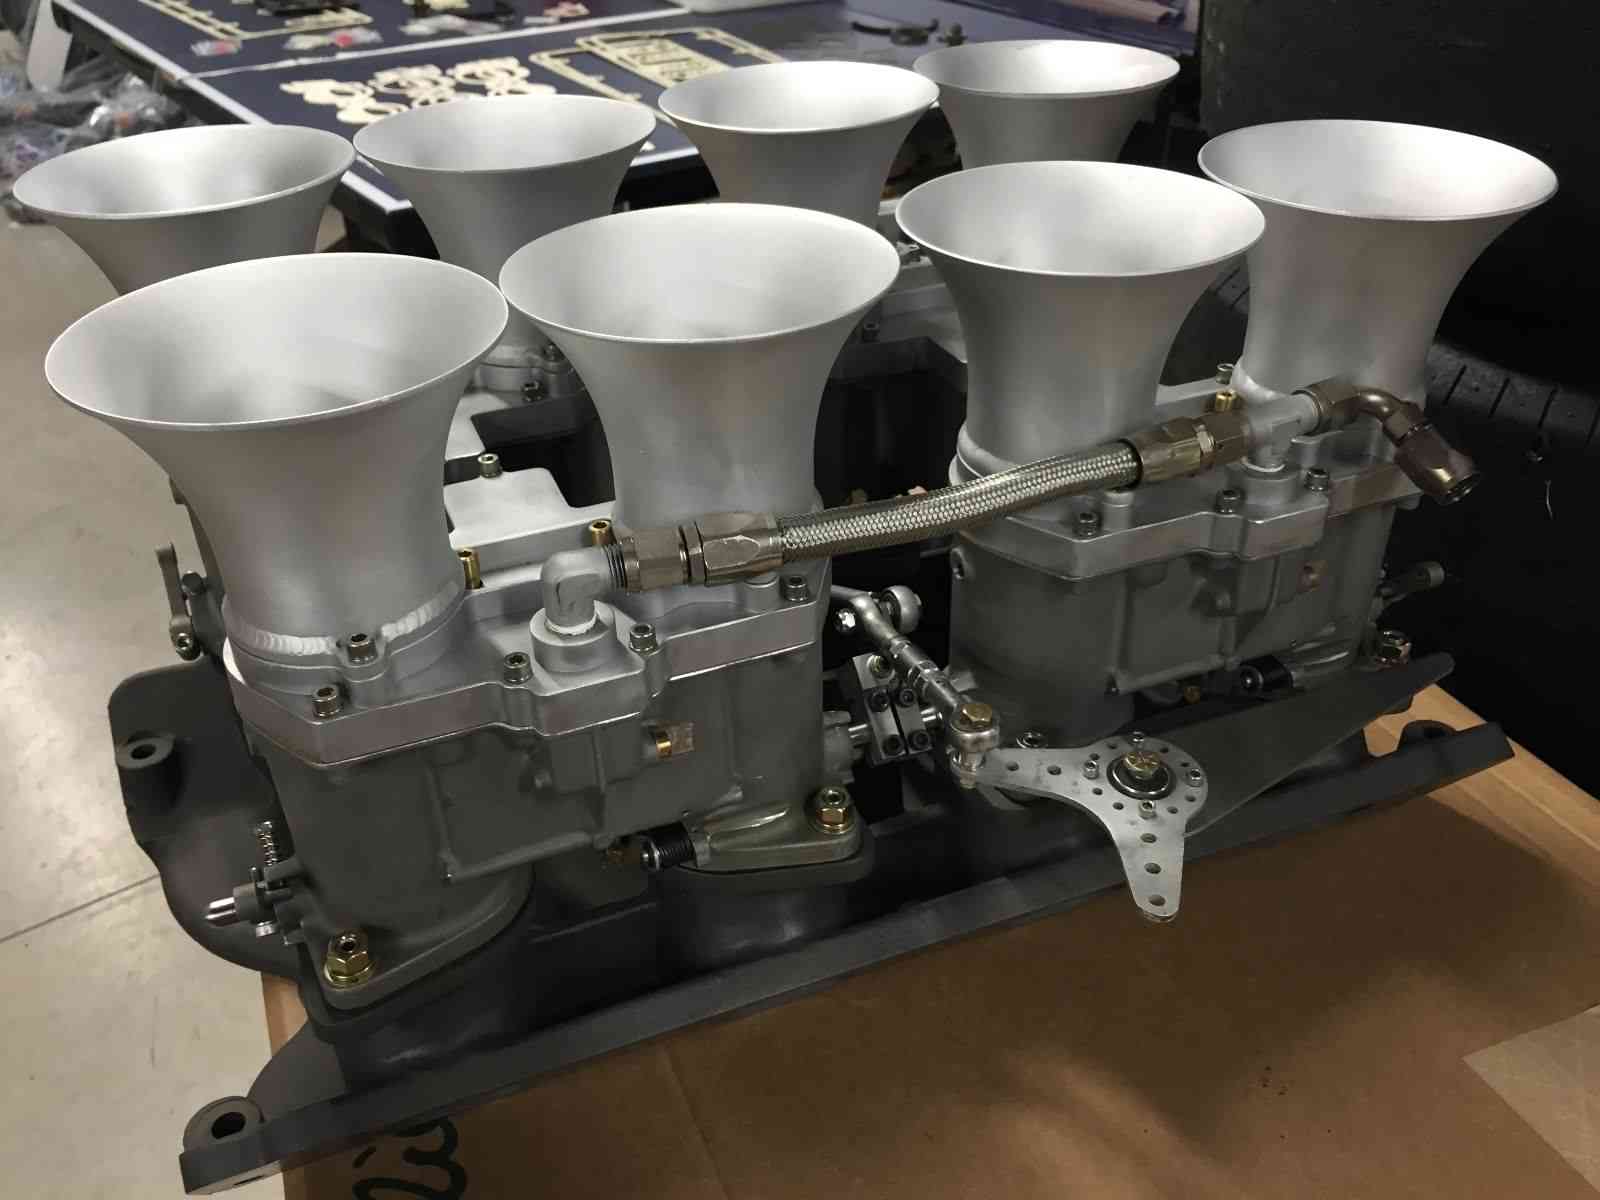 This Boss 429 Can Am Intake Is One Of The Coolest Experimental Factory Race Parts We Have Ever Seen